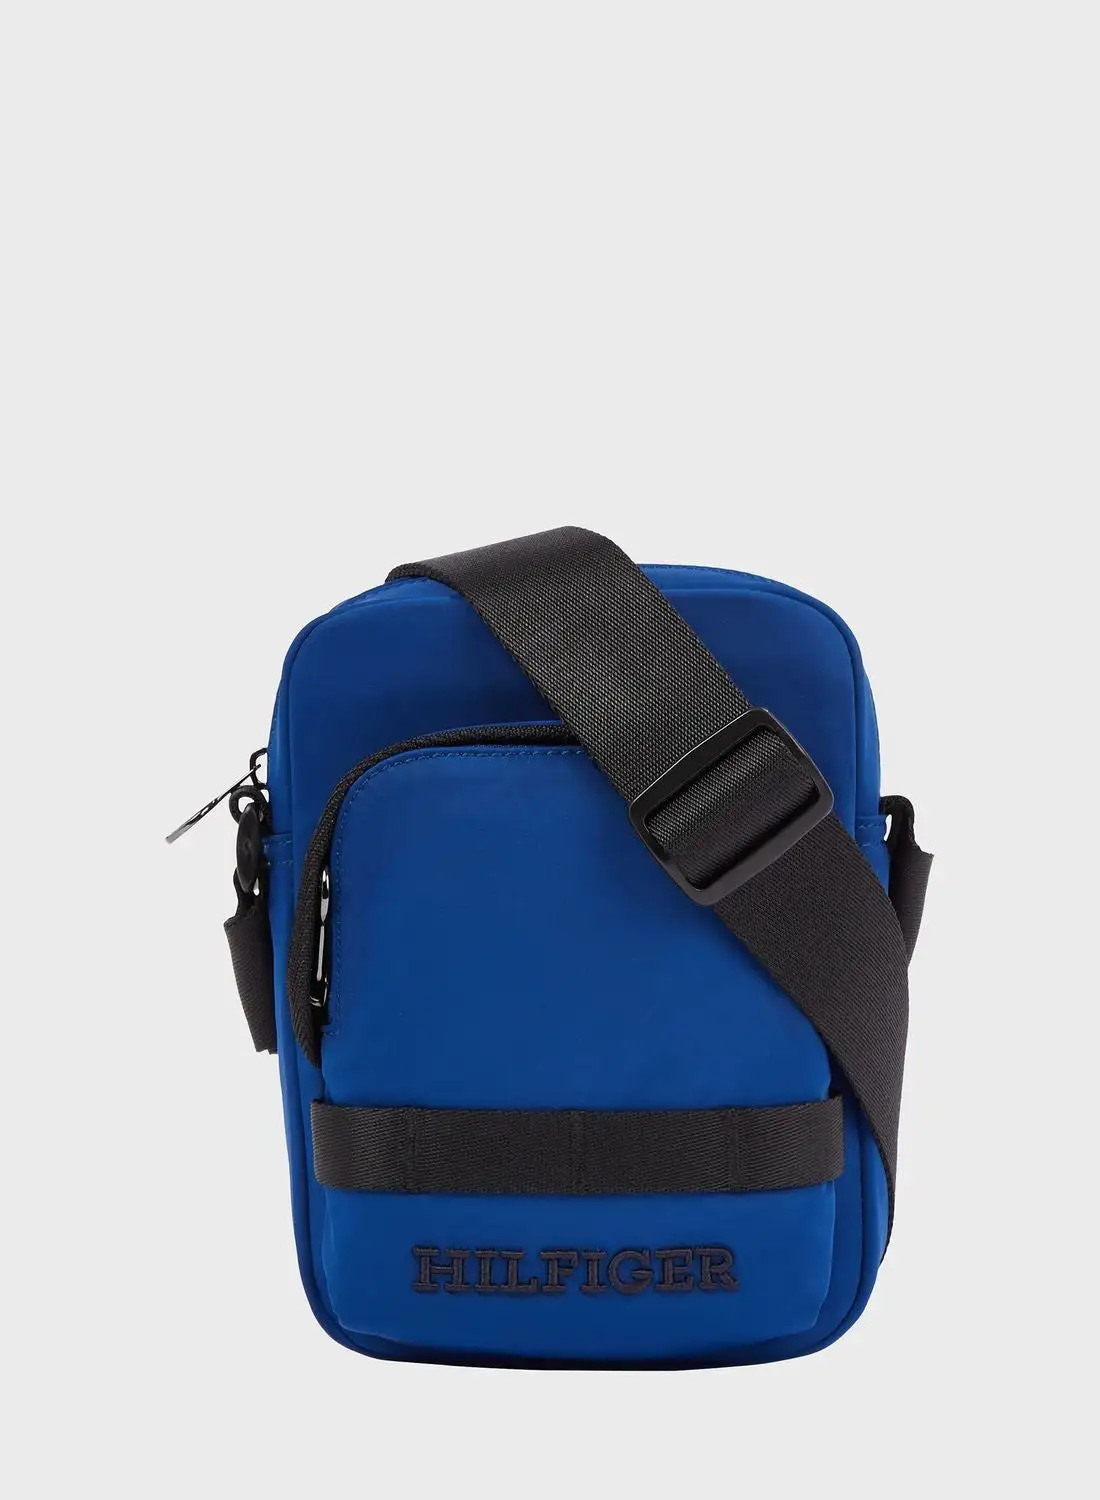 TOMMY HILFIGER Monotype Reporter Bag